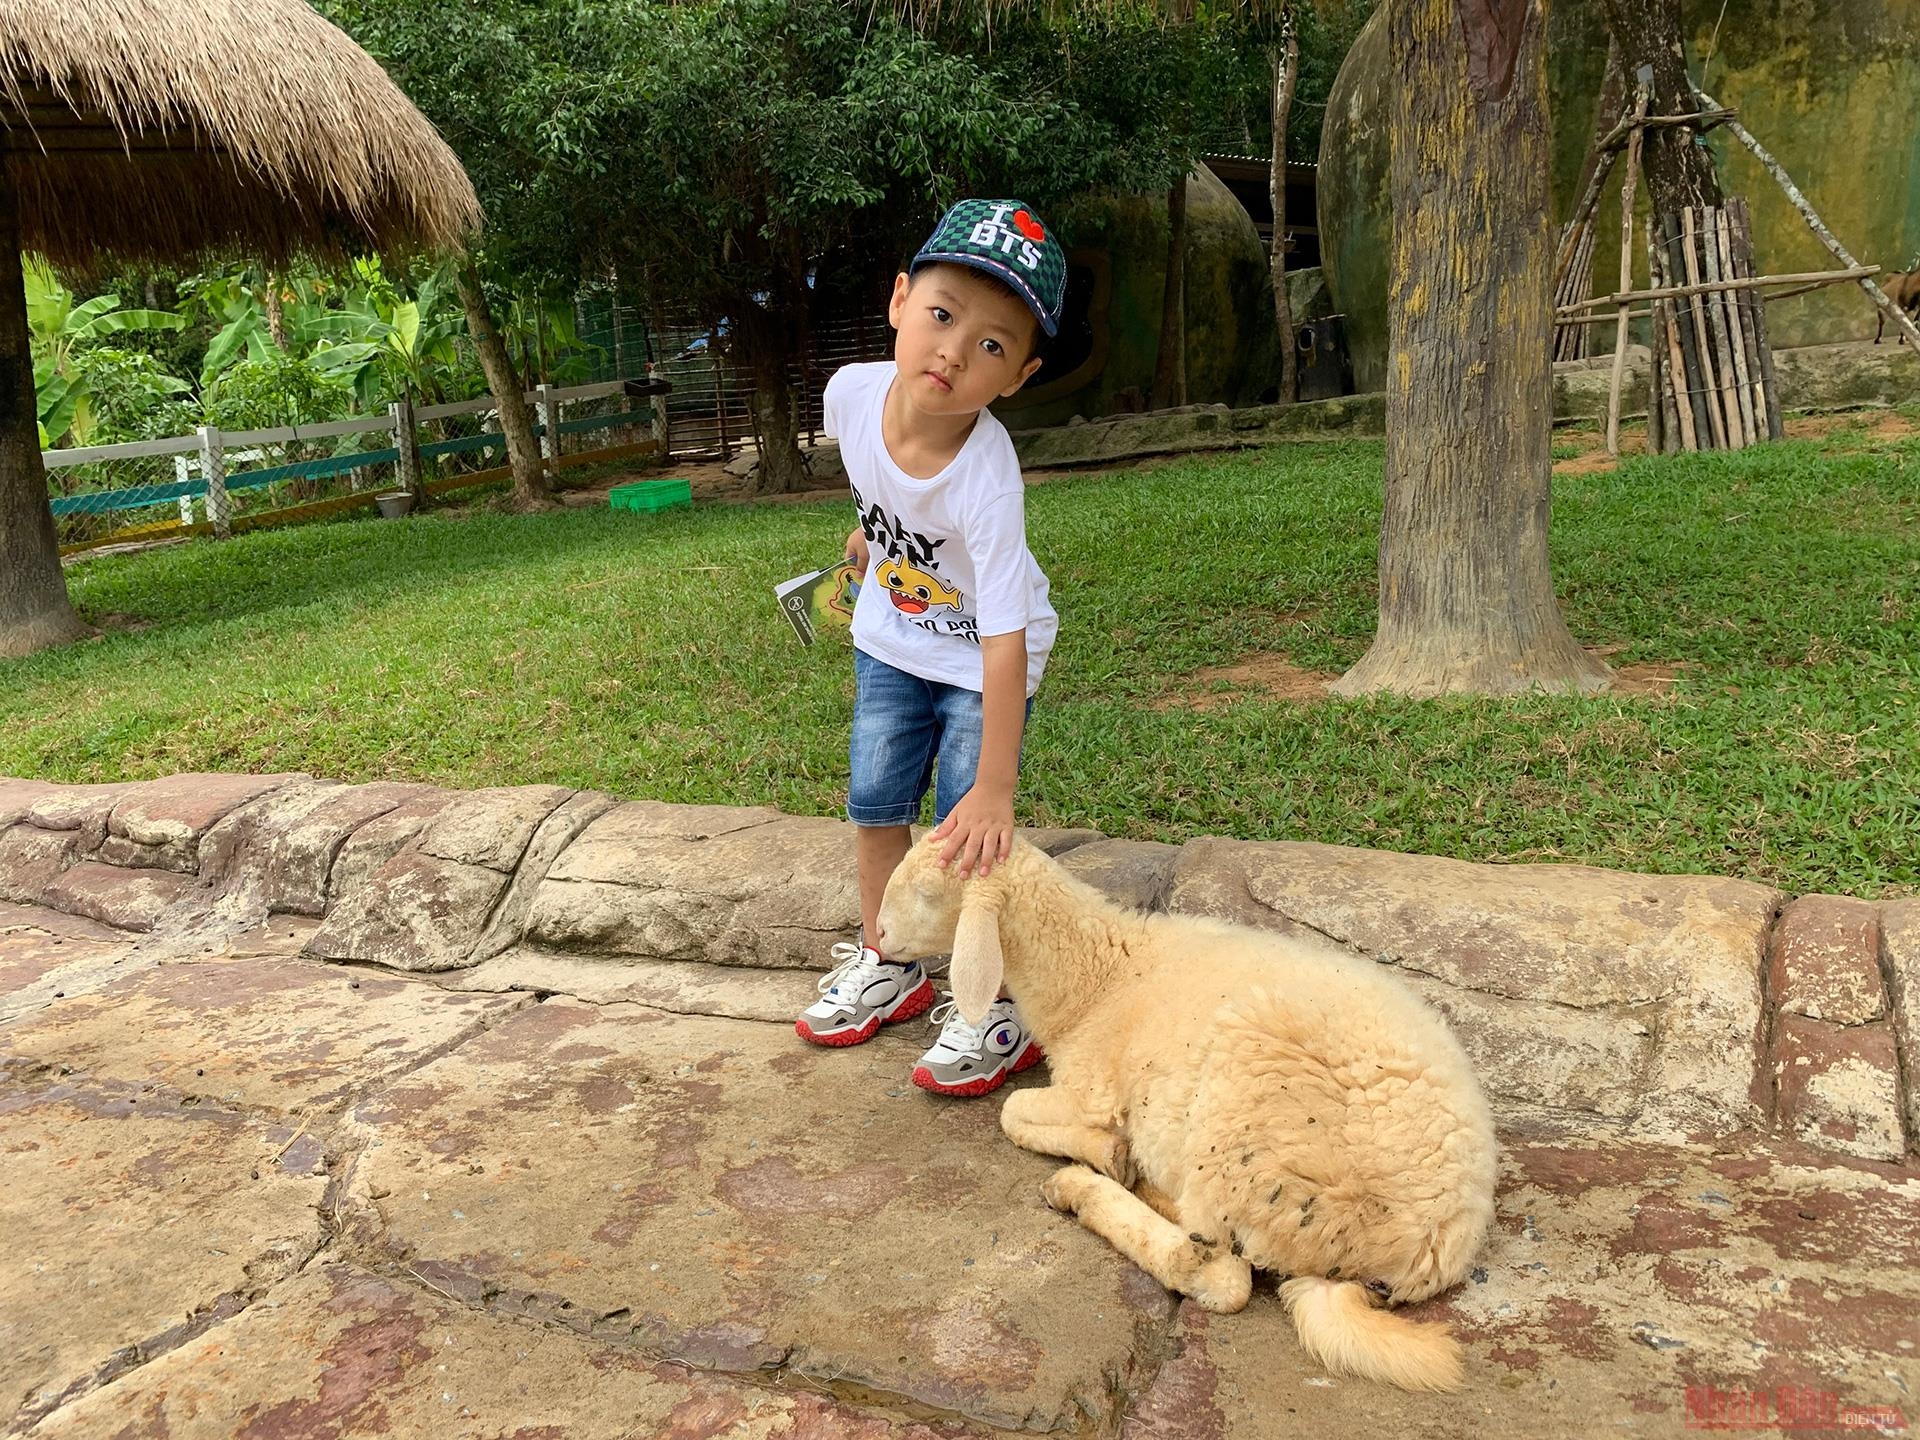 A litlte boy playing with a sheep 